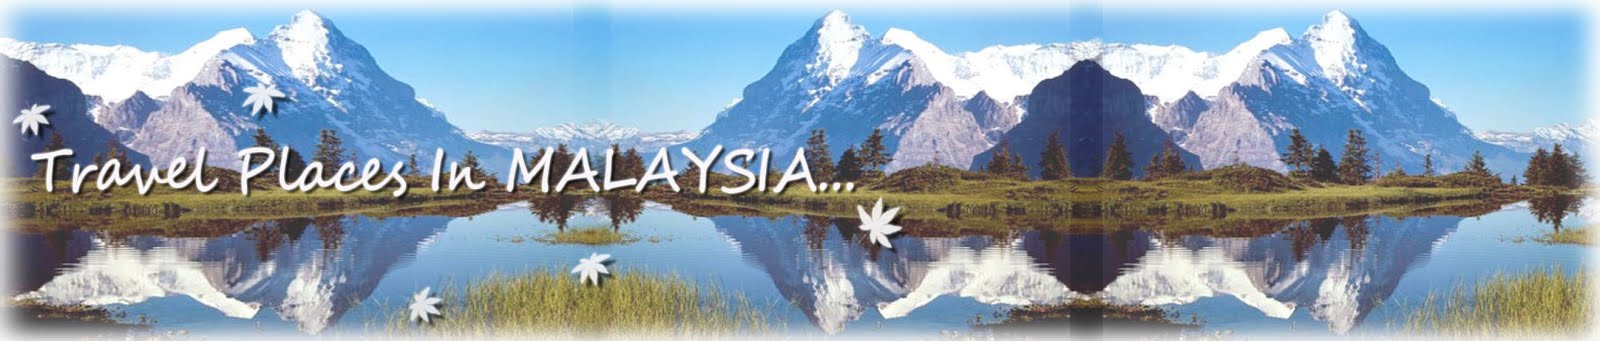 Travel Places In MALAYSIA